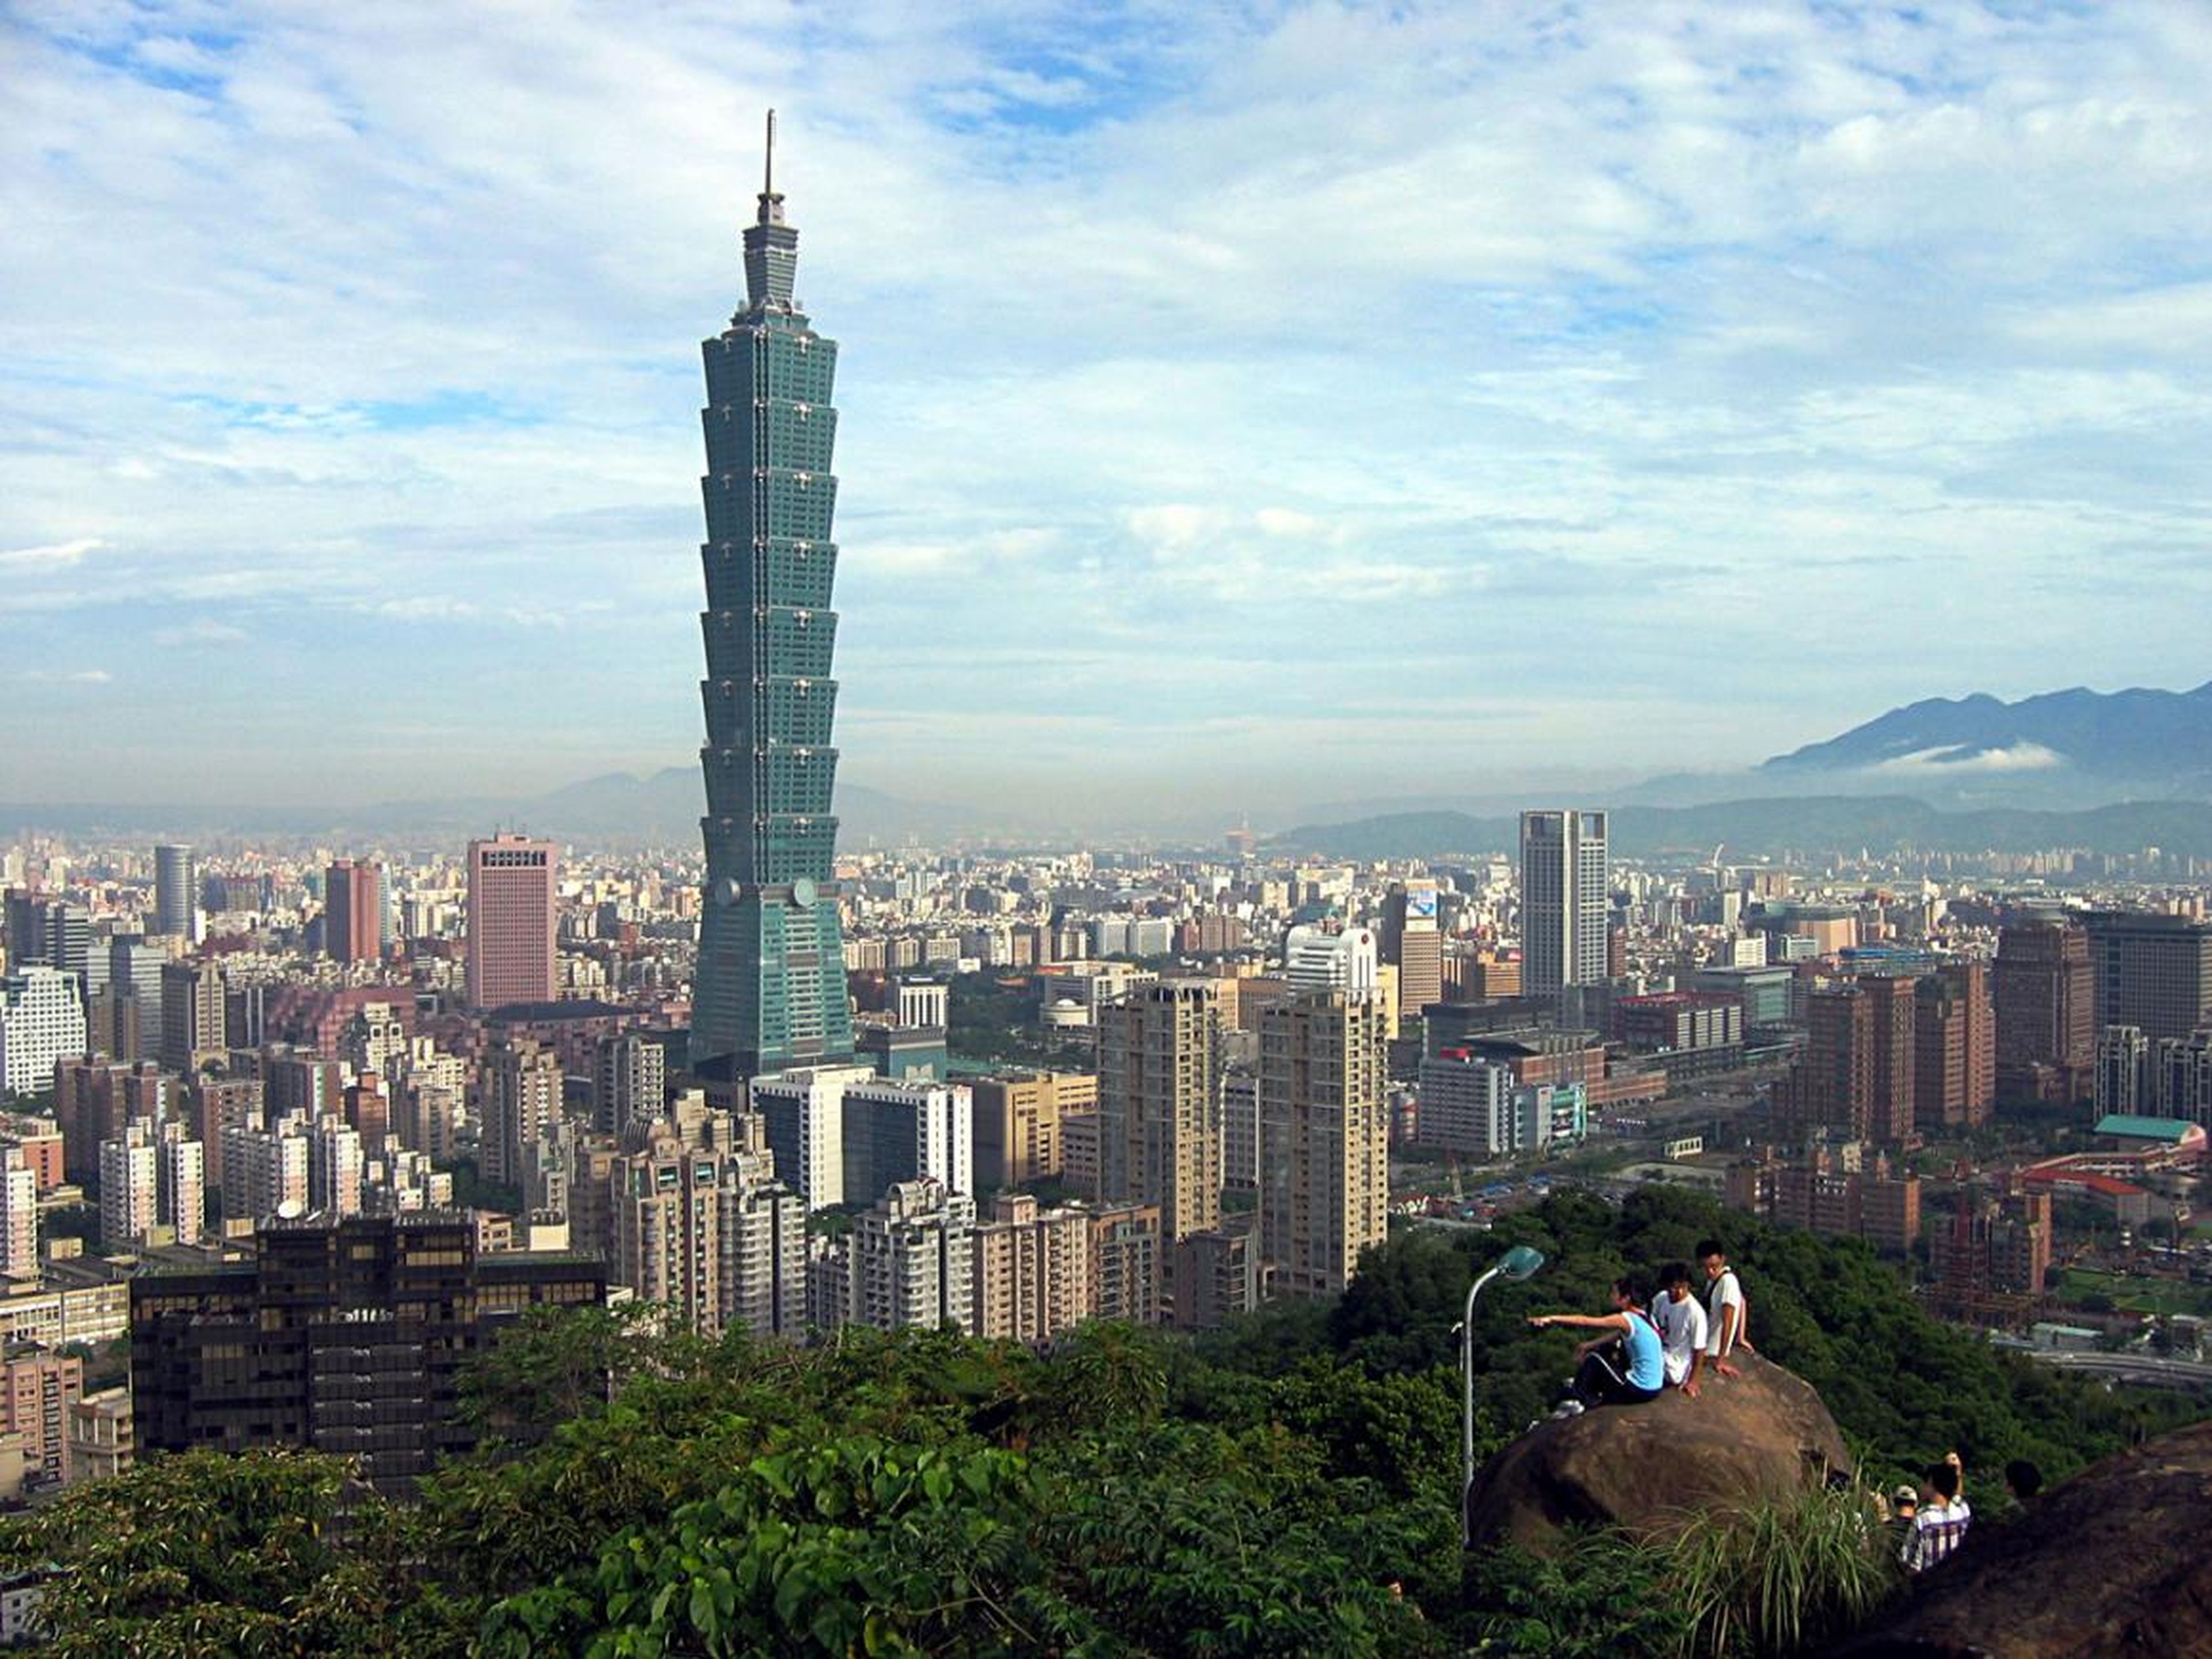 Stretching 101 stories, the aptly named Taipei 101 was built in 2004. It hovers over Taiwan and cost $1.8 billion.